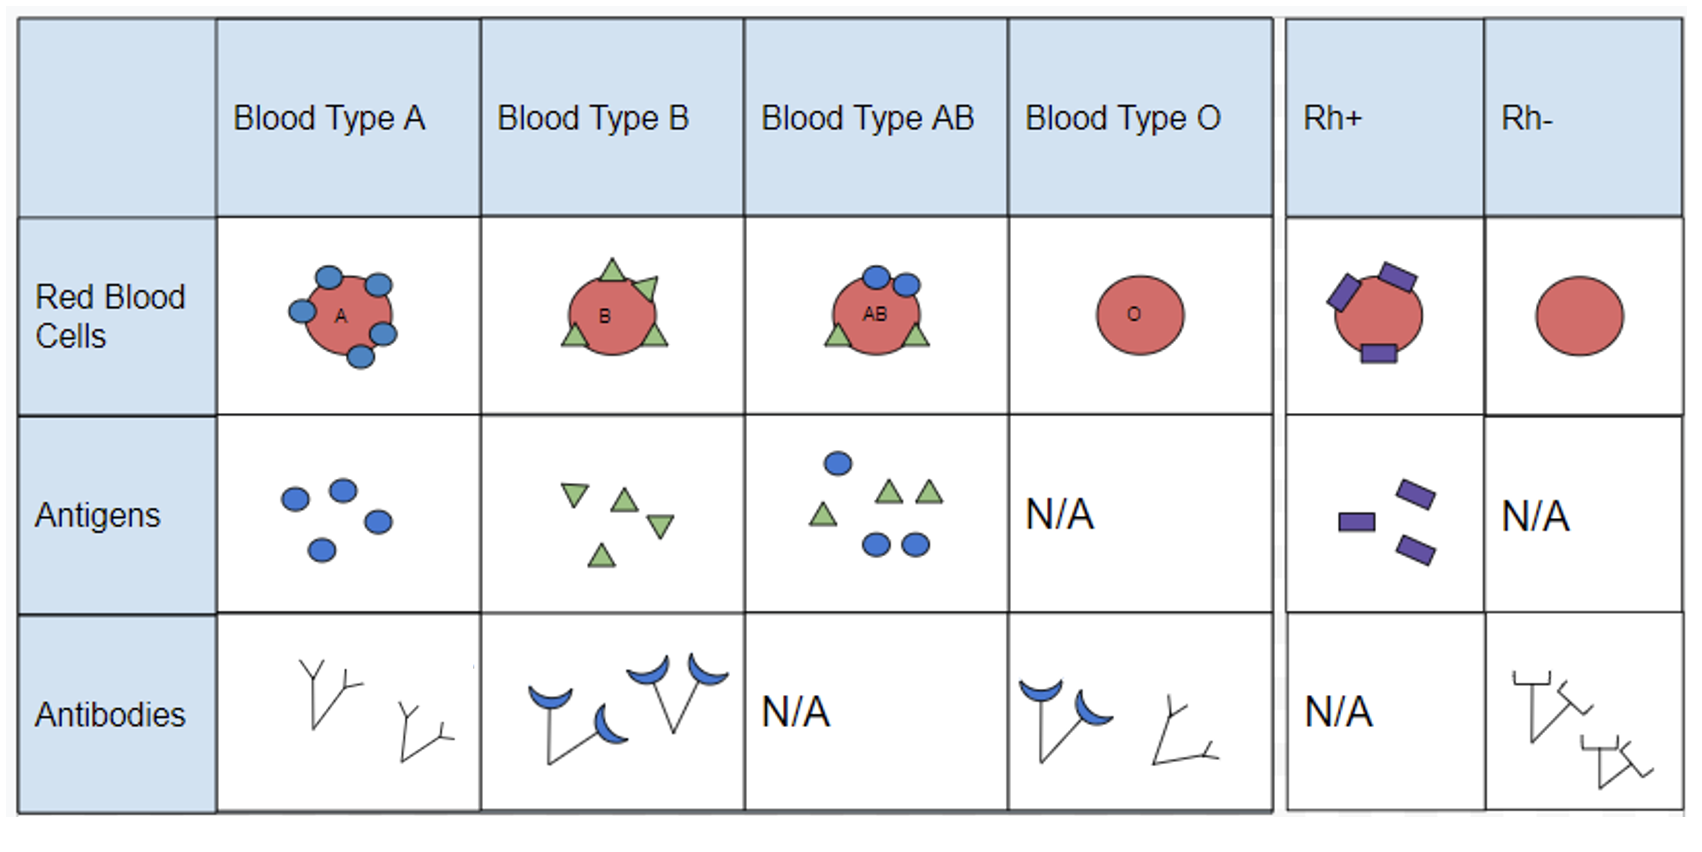 ABO (A, B, AB, and O), and Rhesus (Rh+ and Rh-) blood cells, antigens, and antibodies are drawn.